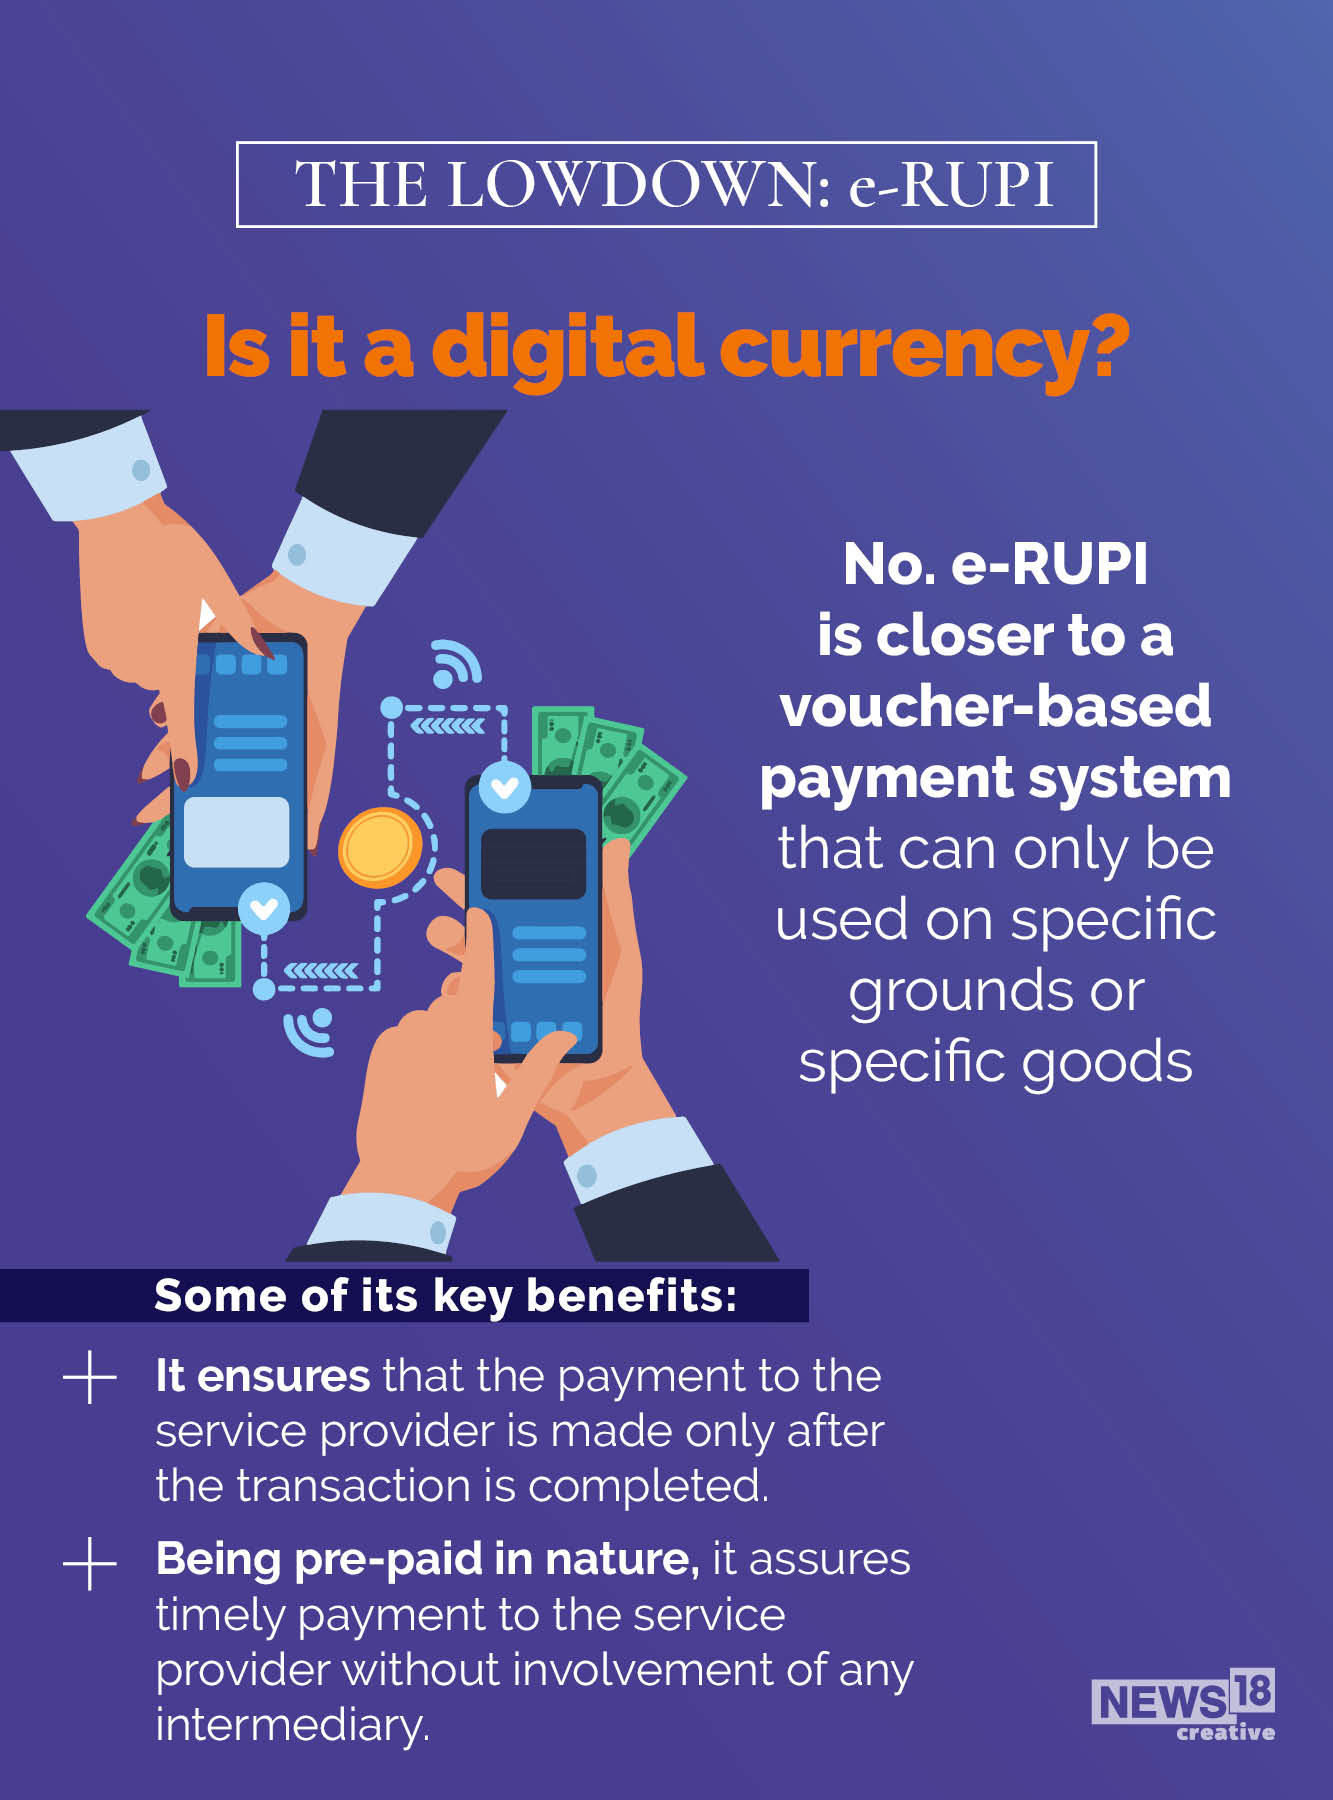 What is e-RUPI and how does it work?